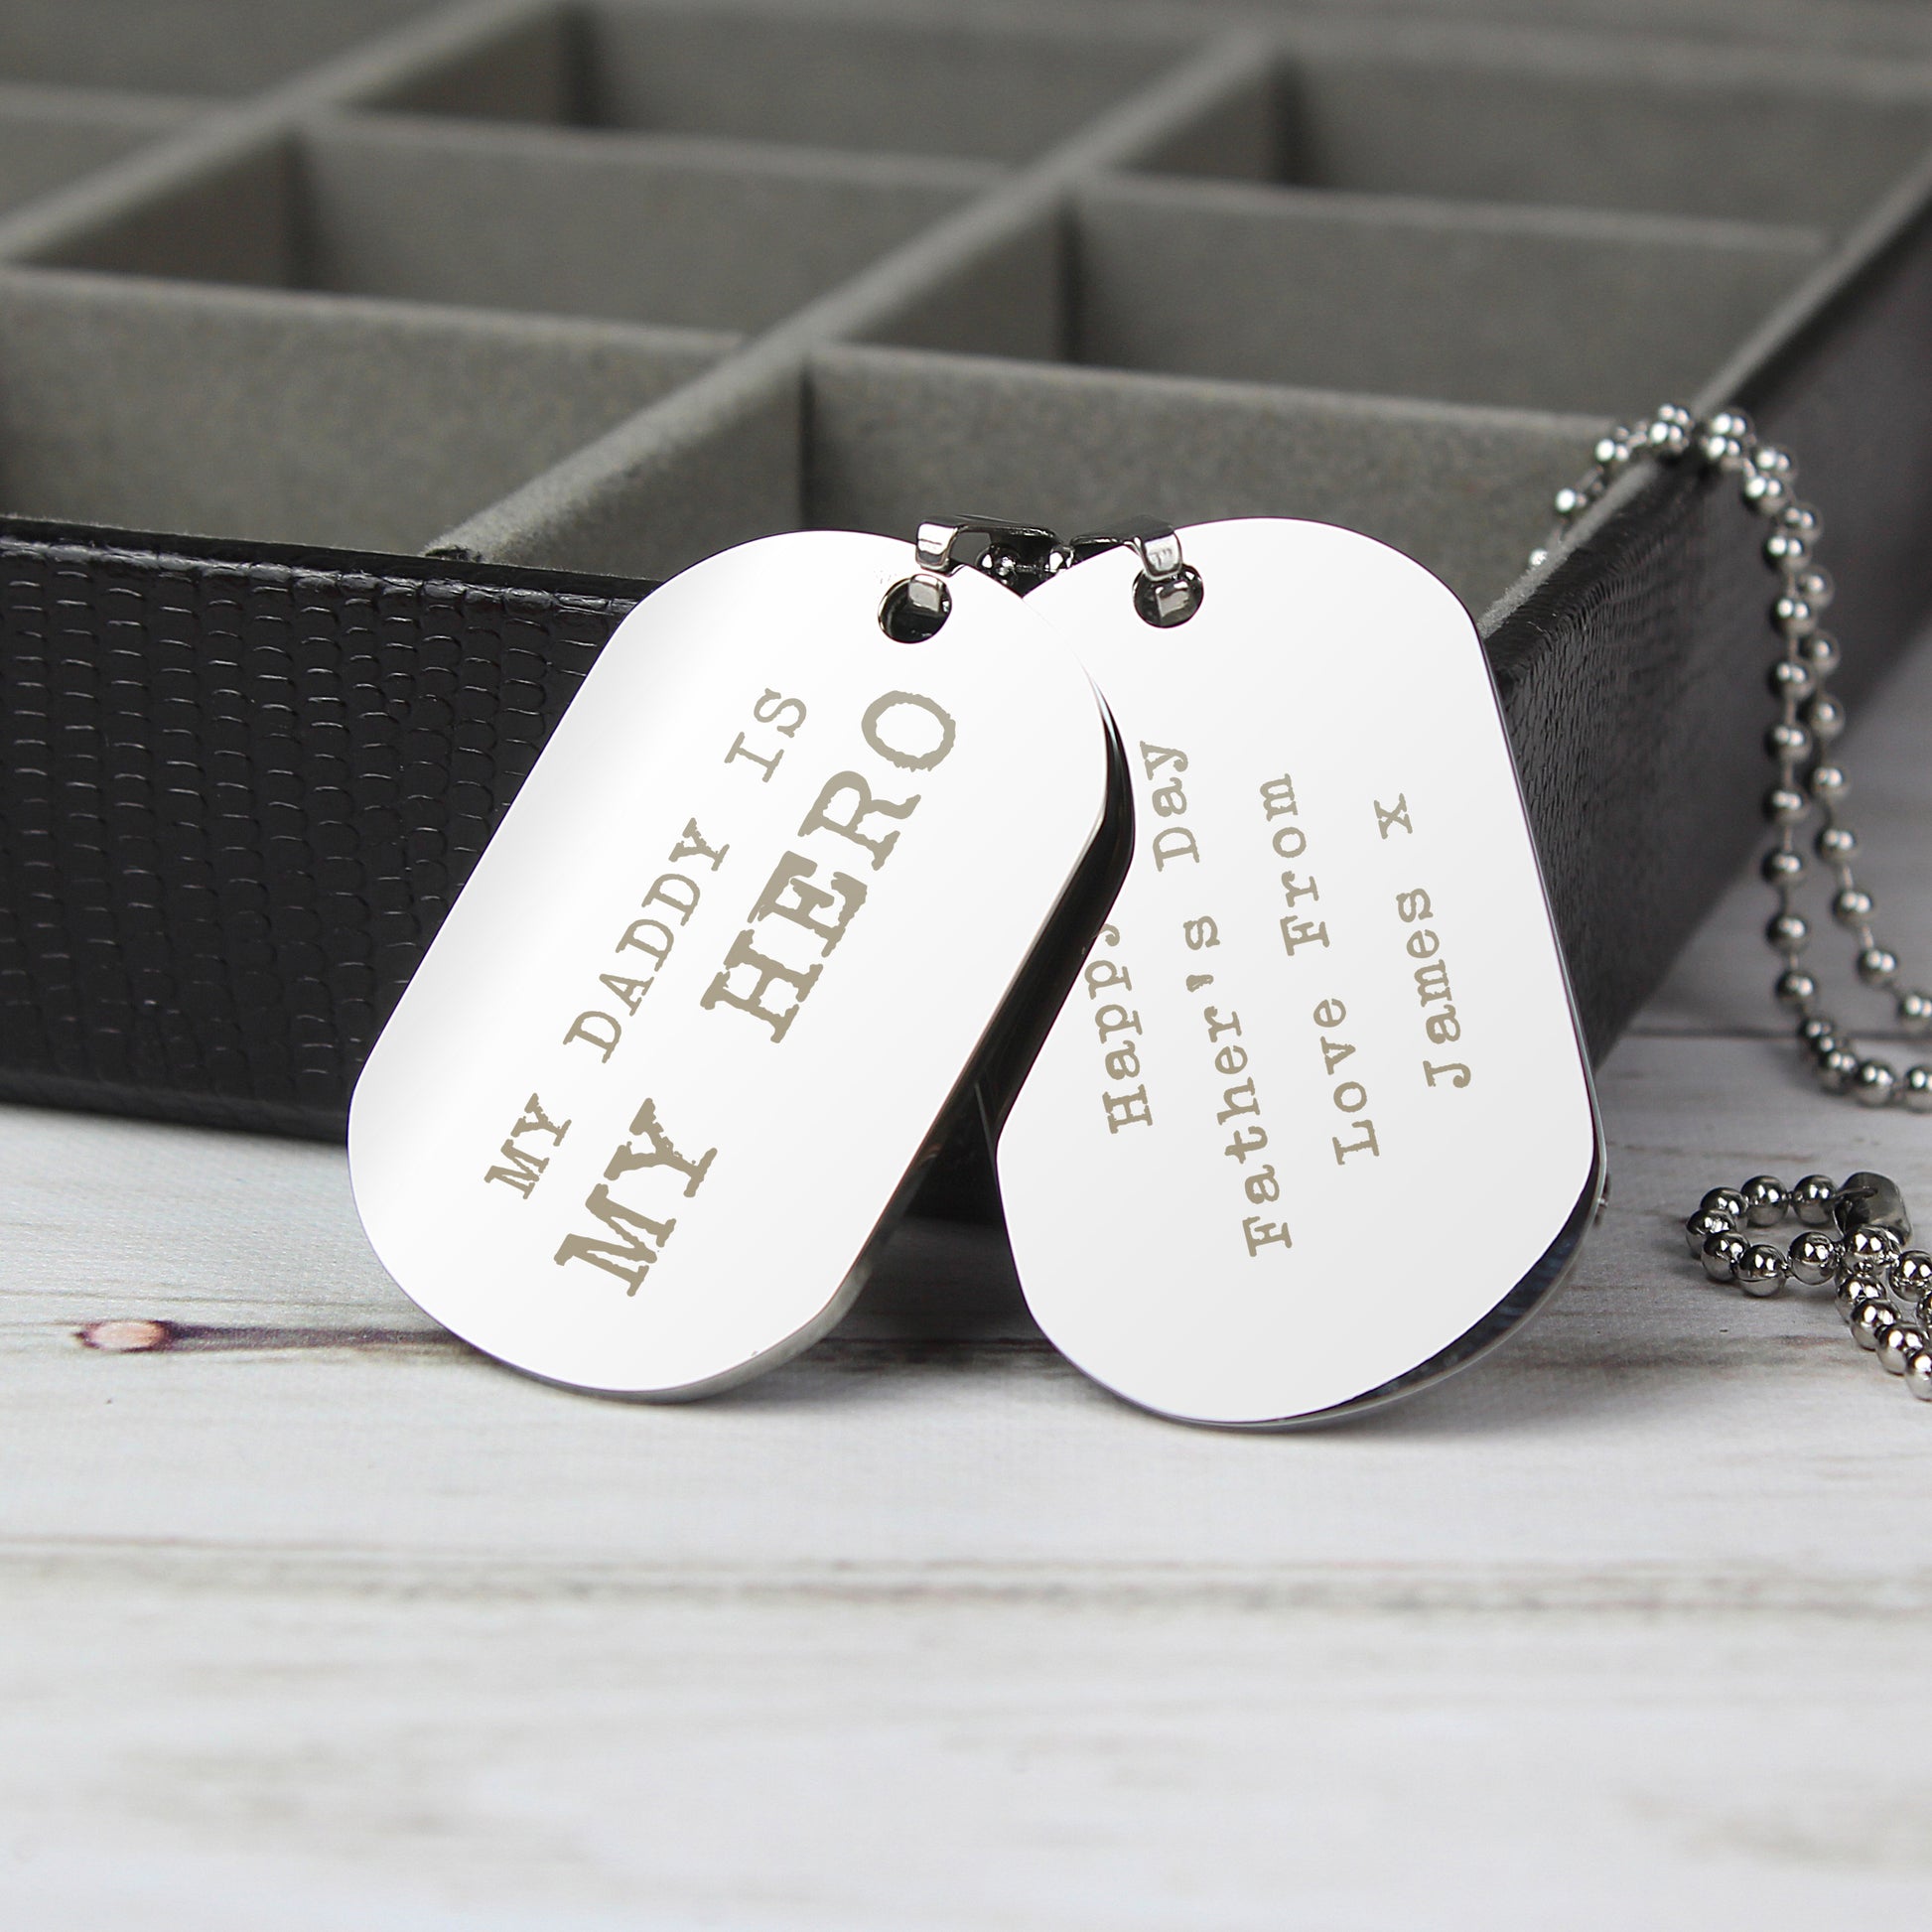 Personalised Double Dog Tag Necklace - Violet Belle Gifts - Personalised Engraved Double Dog Tag Necklace